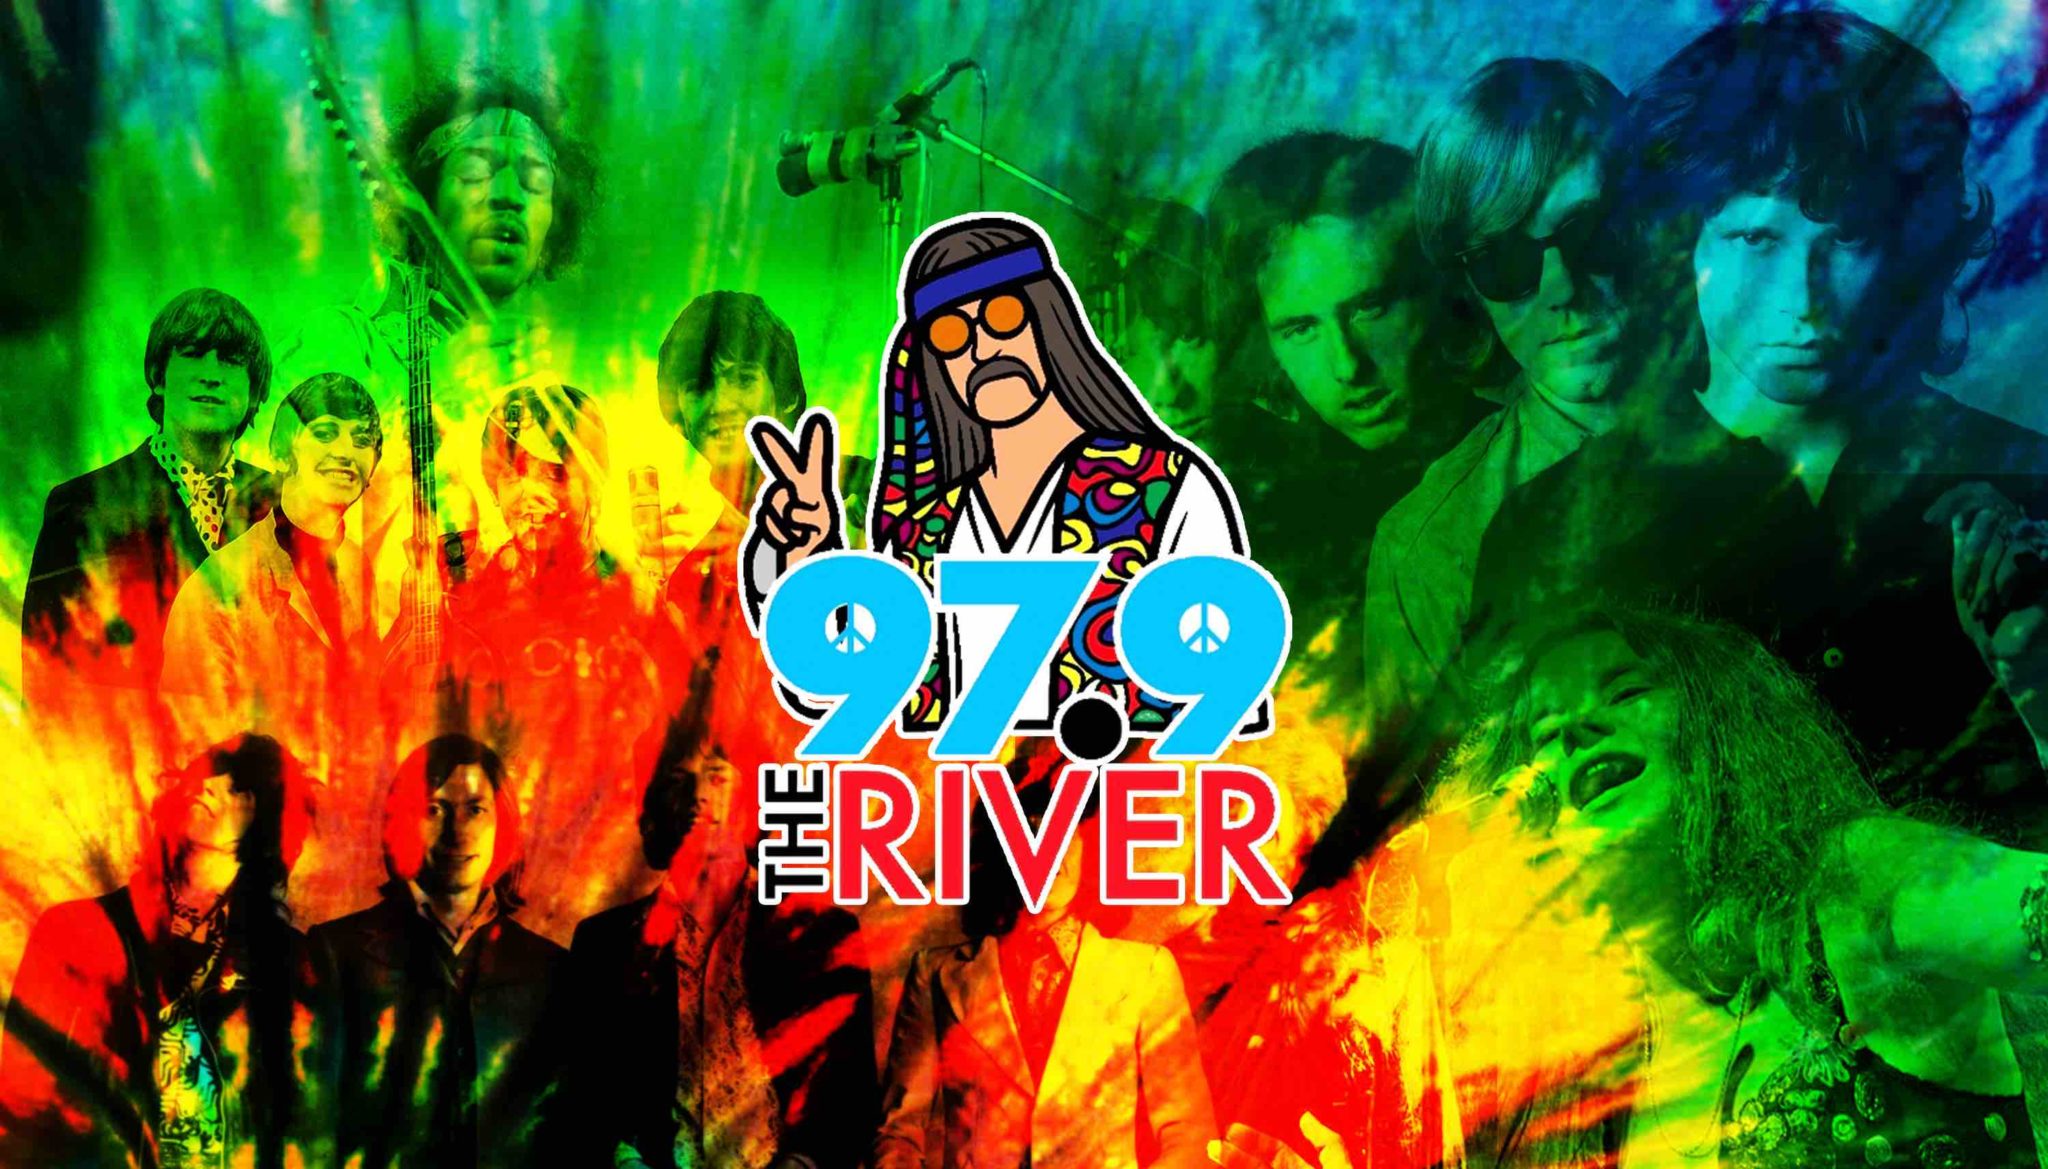 97.9 FM The River Brings Back Greatest Hits Of The Rock N’ Roll Generation